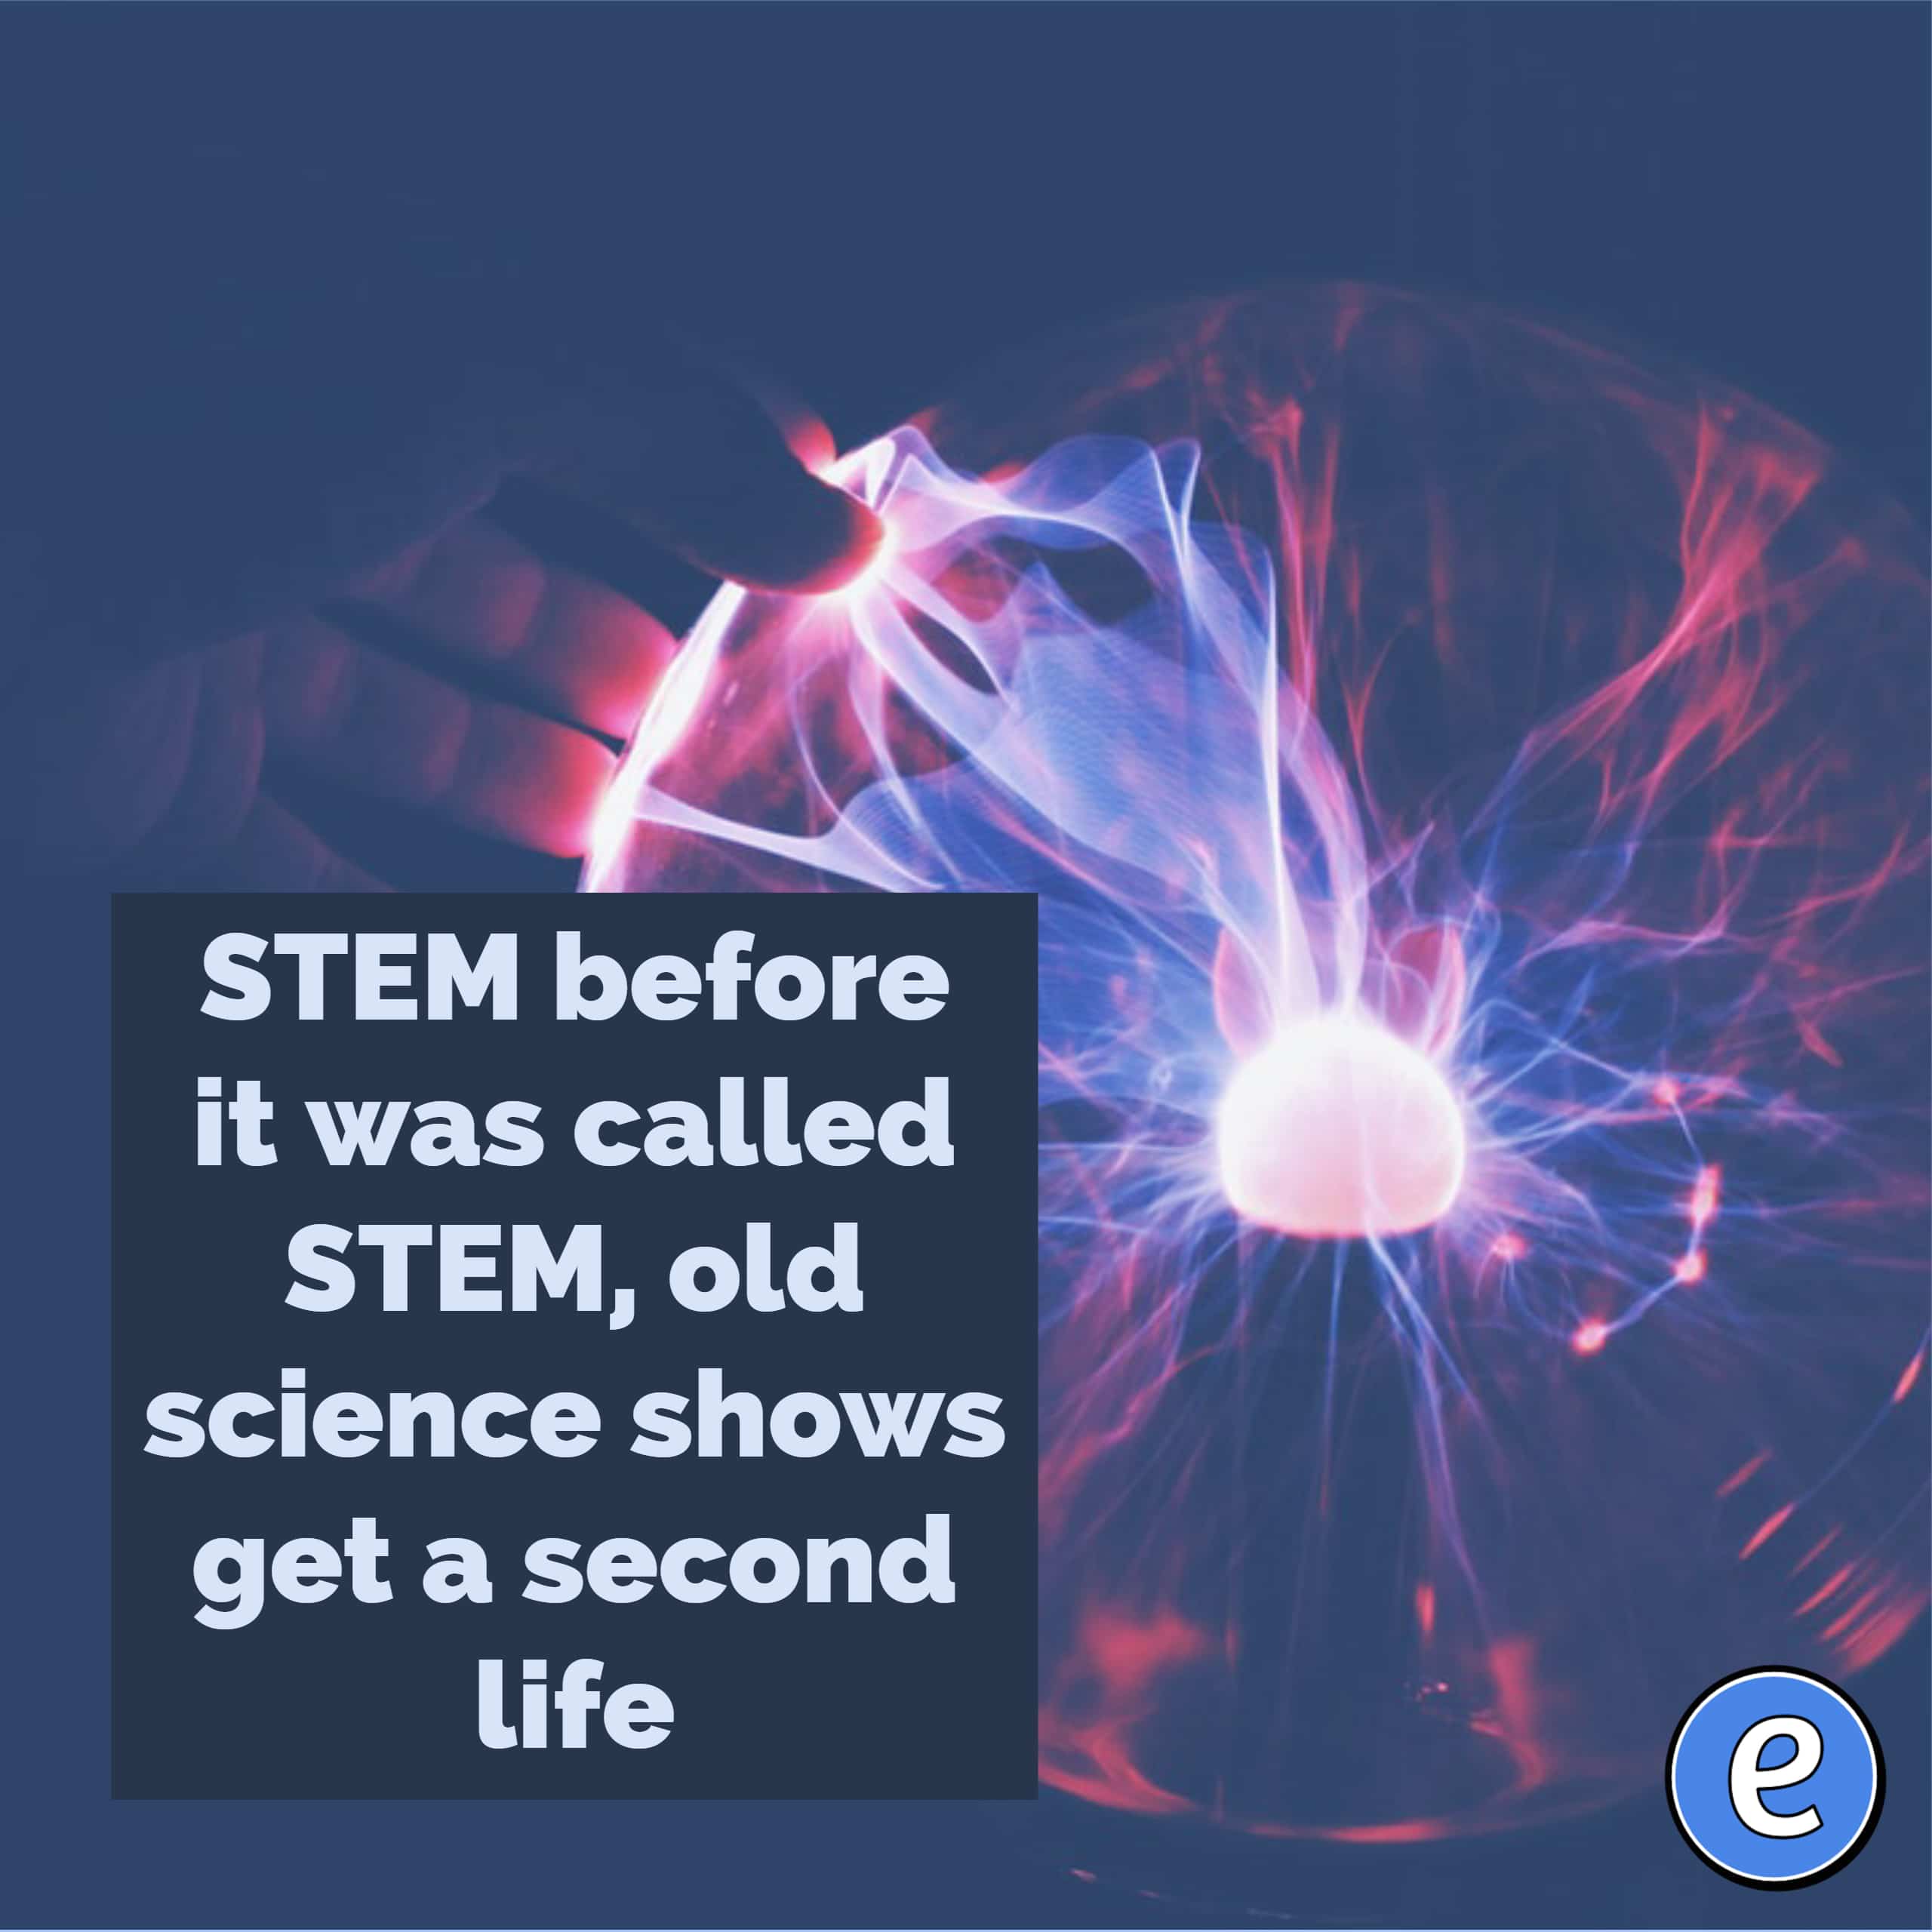 STEM before it was called STEM, old science shows get a second life